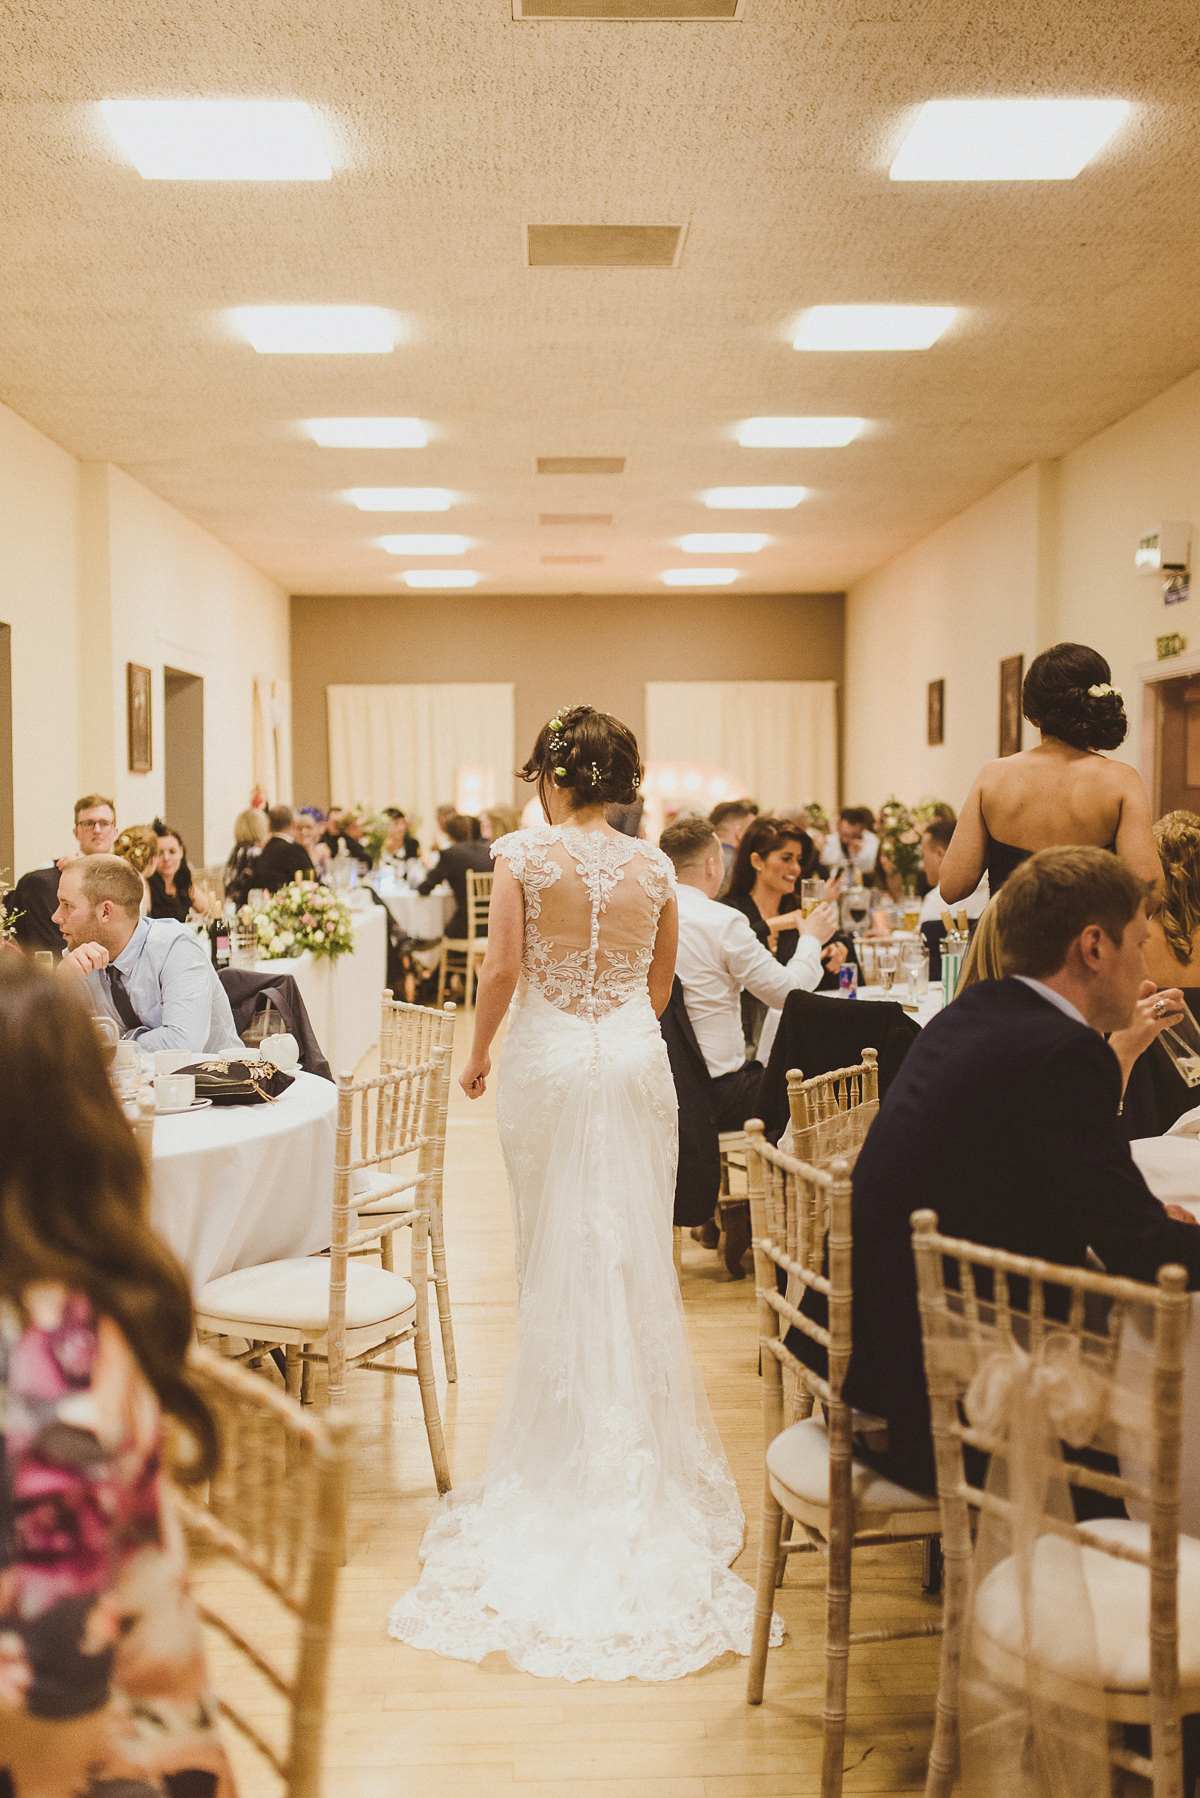 Bride Jade wore a Maggie Sottero gown for her romantic and elegant country house spring time wedding. Photography by Alexa Penberthy.